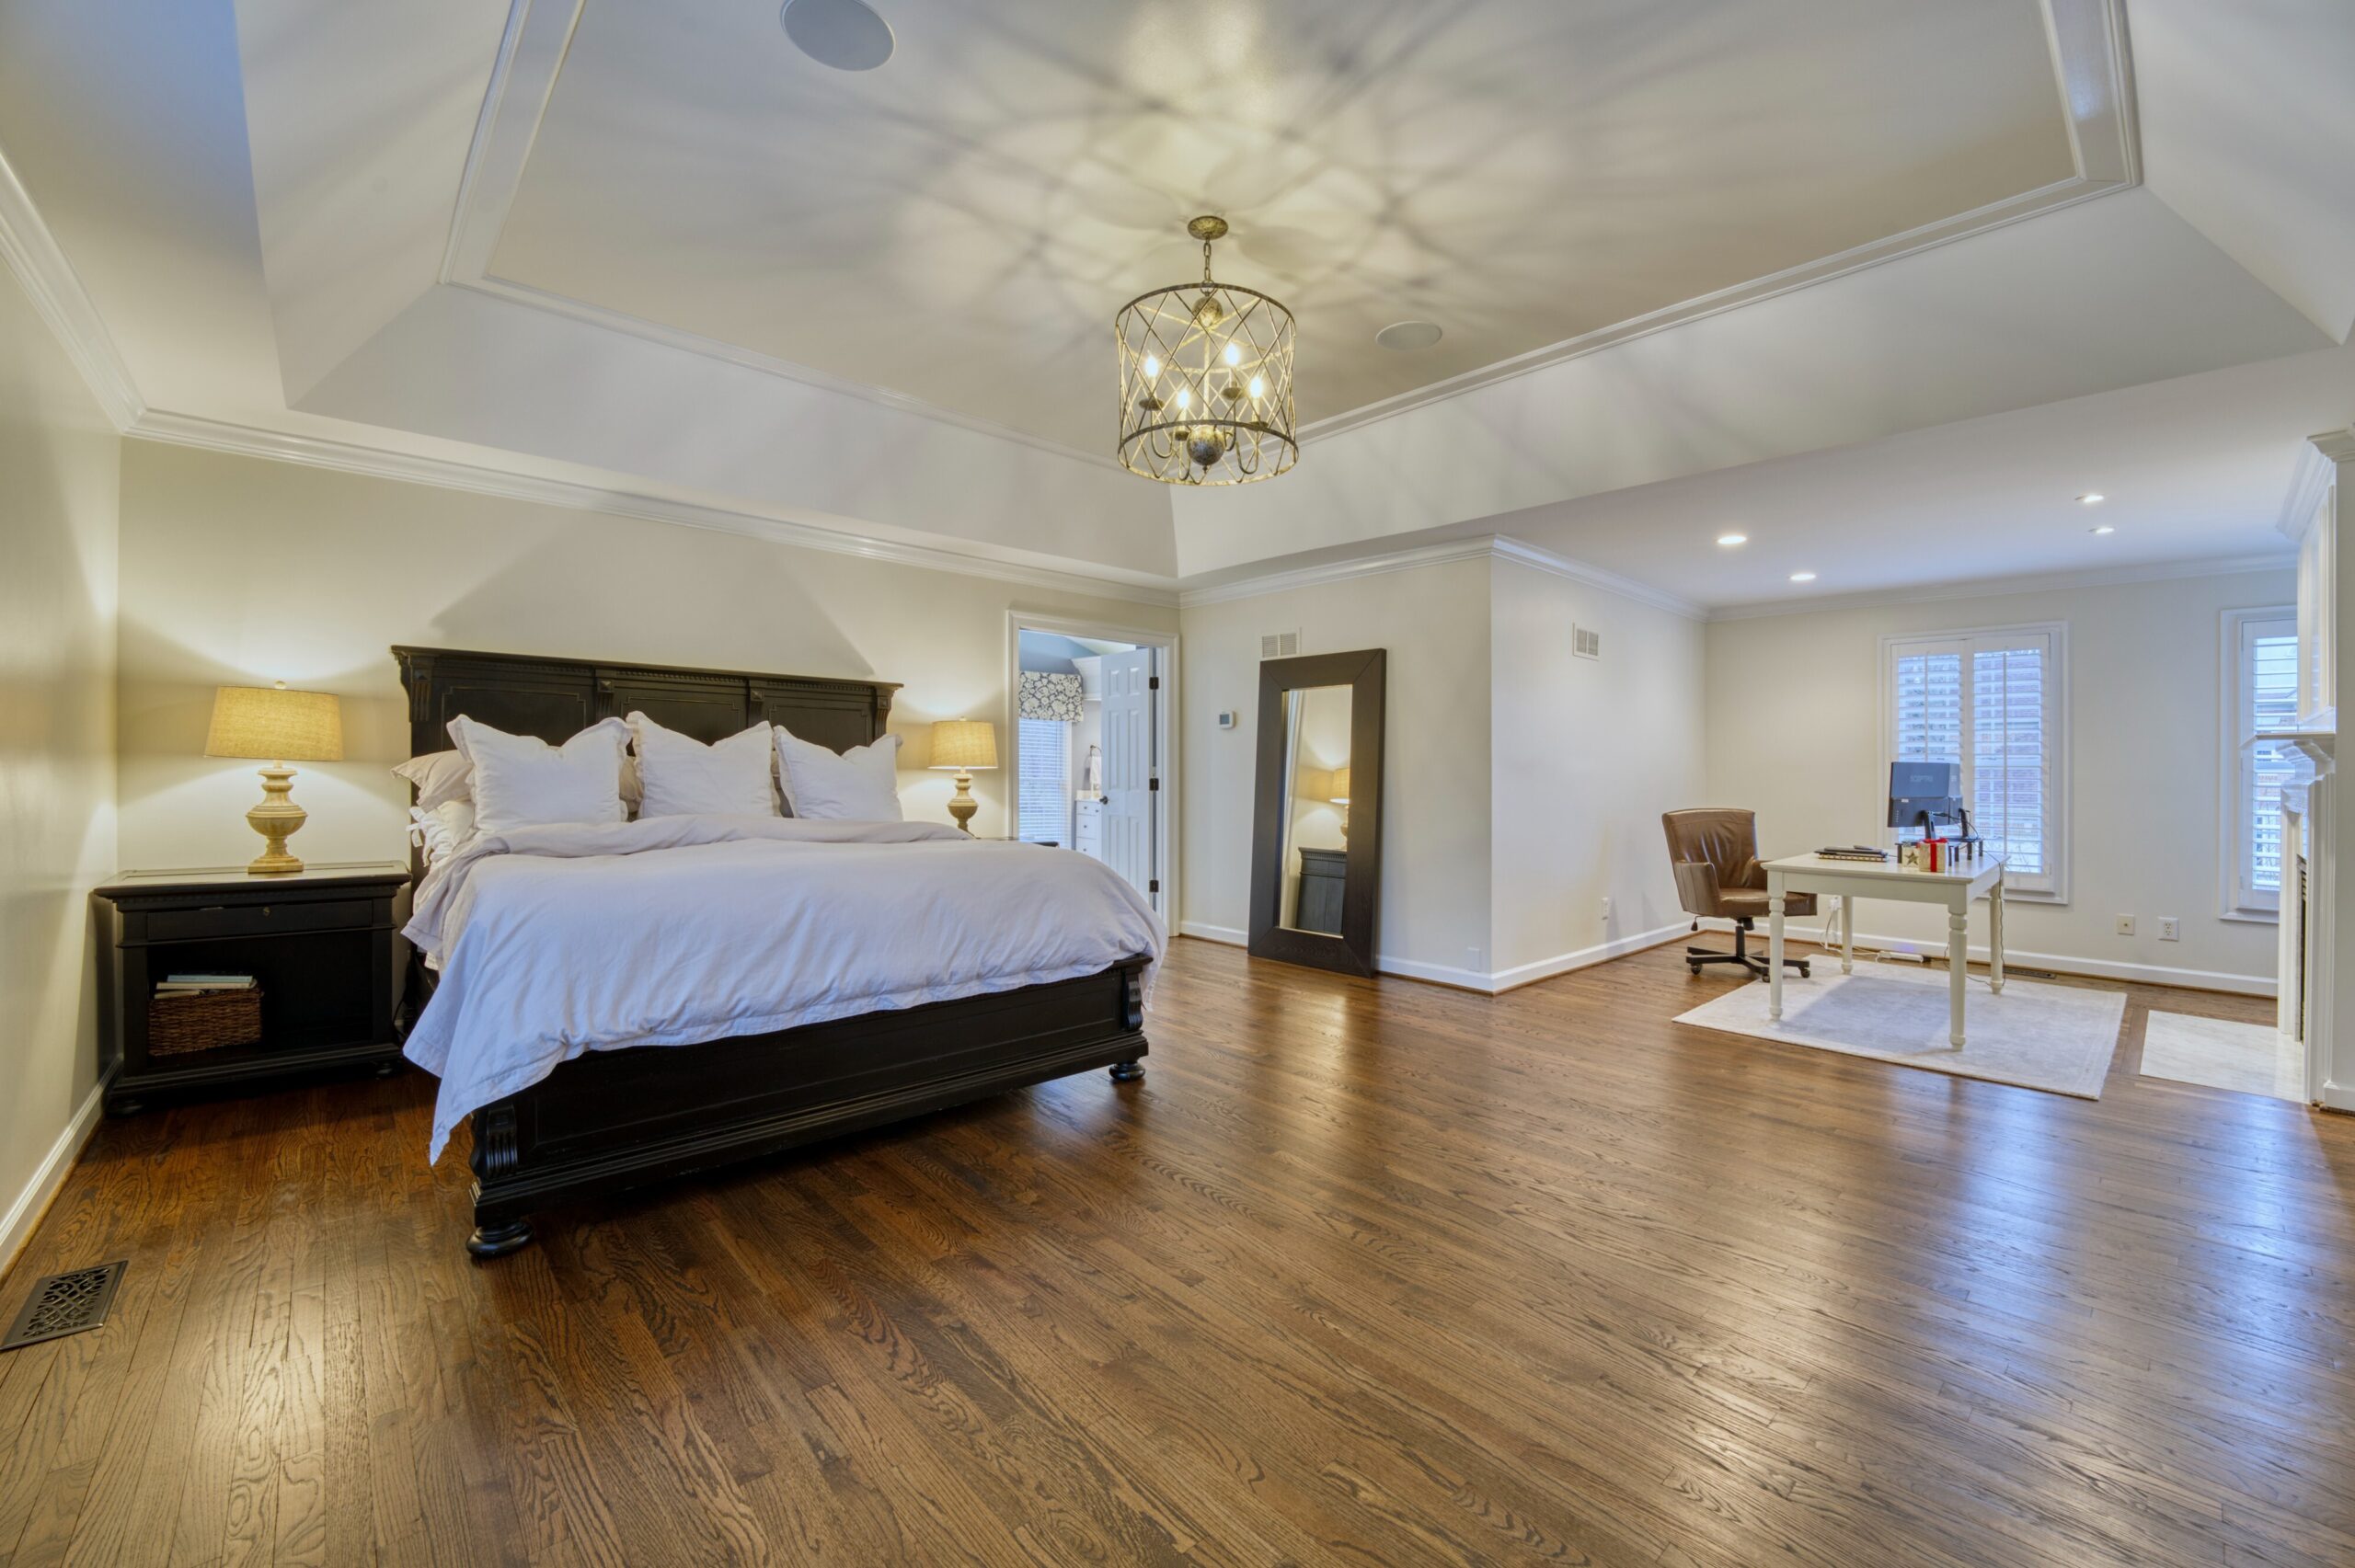 Professional interior photo of 47572 Compton Circle, Sterling, VA - showing the primary bedroom with deep trey ceiling and nook which has been set up as an office